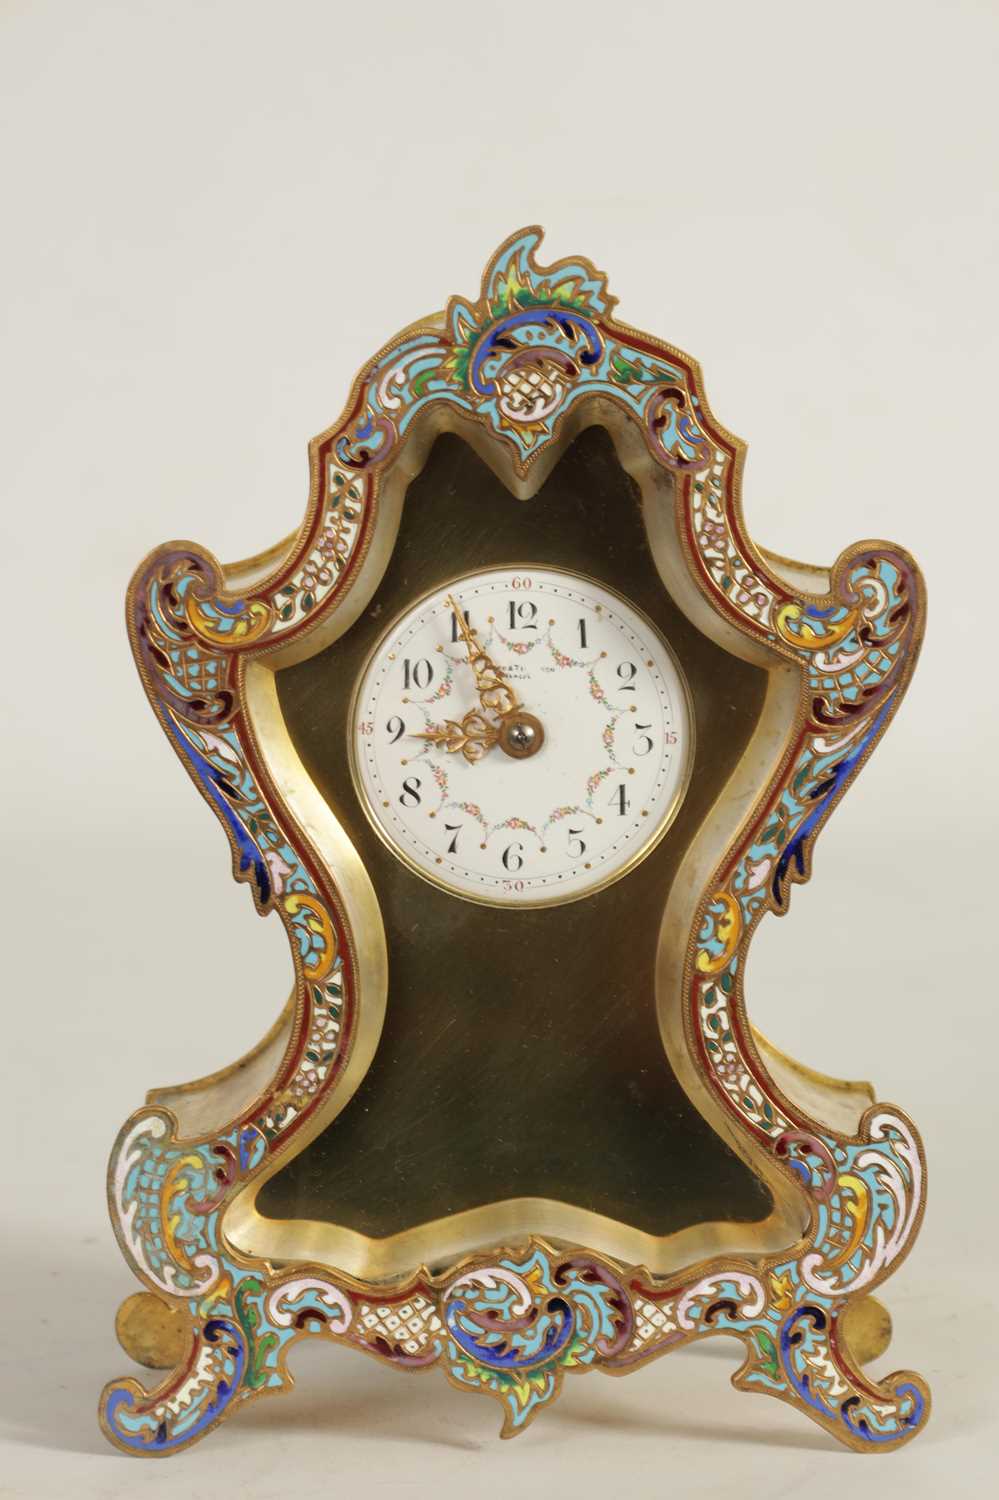 A LATE 19TH CENTURY BRASS AND CHAMPLEVE ENAMEL MANTEL CLOCK - Image 2 of 10